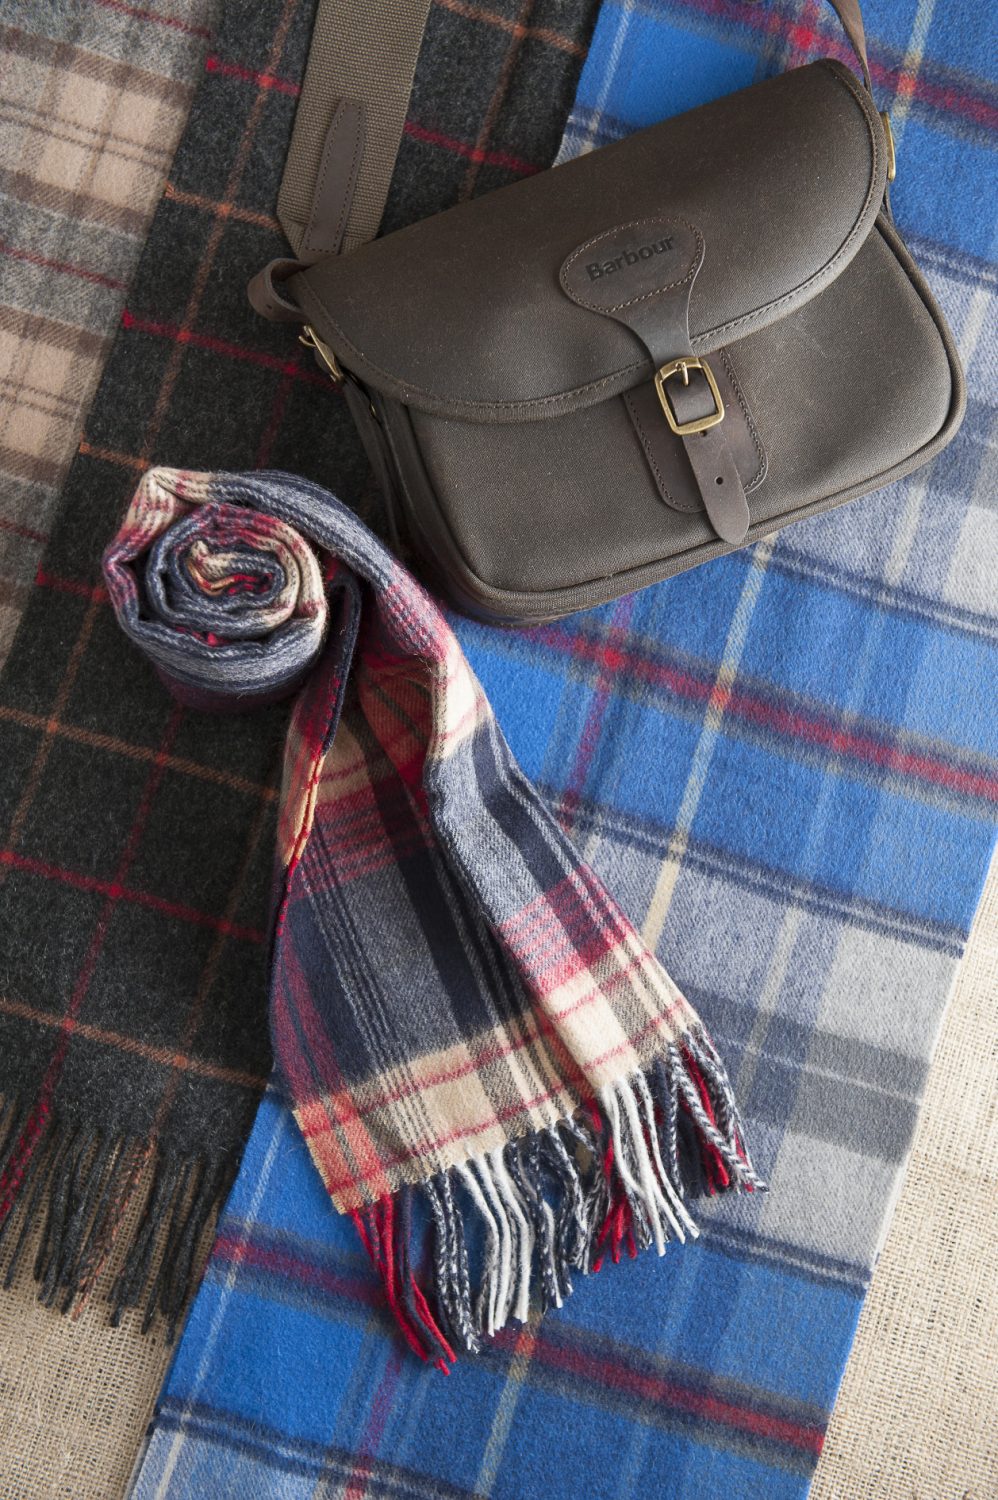 Barbour waxed cartridge bag, £79.95, Barbour lambswool tartan scarves (left, middle and rolled), from £24.95, The Golden Fleece, Rye 01797 224271 www.thegoldenfleece.co.uk; Joules scarf (right), £19.95, Charity Farm Countrystore, Cranbrook 01580 713189 www.charityfarmcountrystore.co.uk